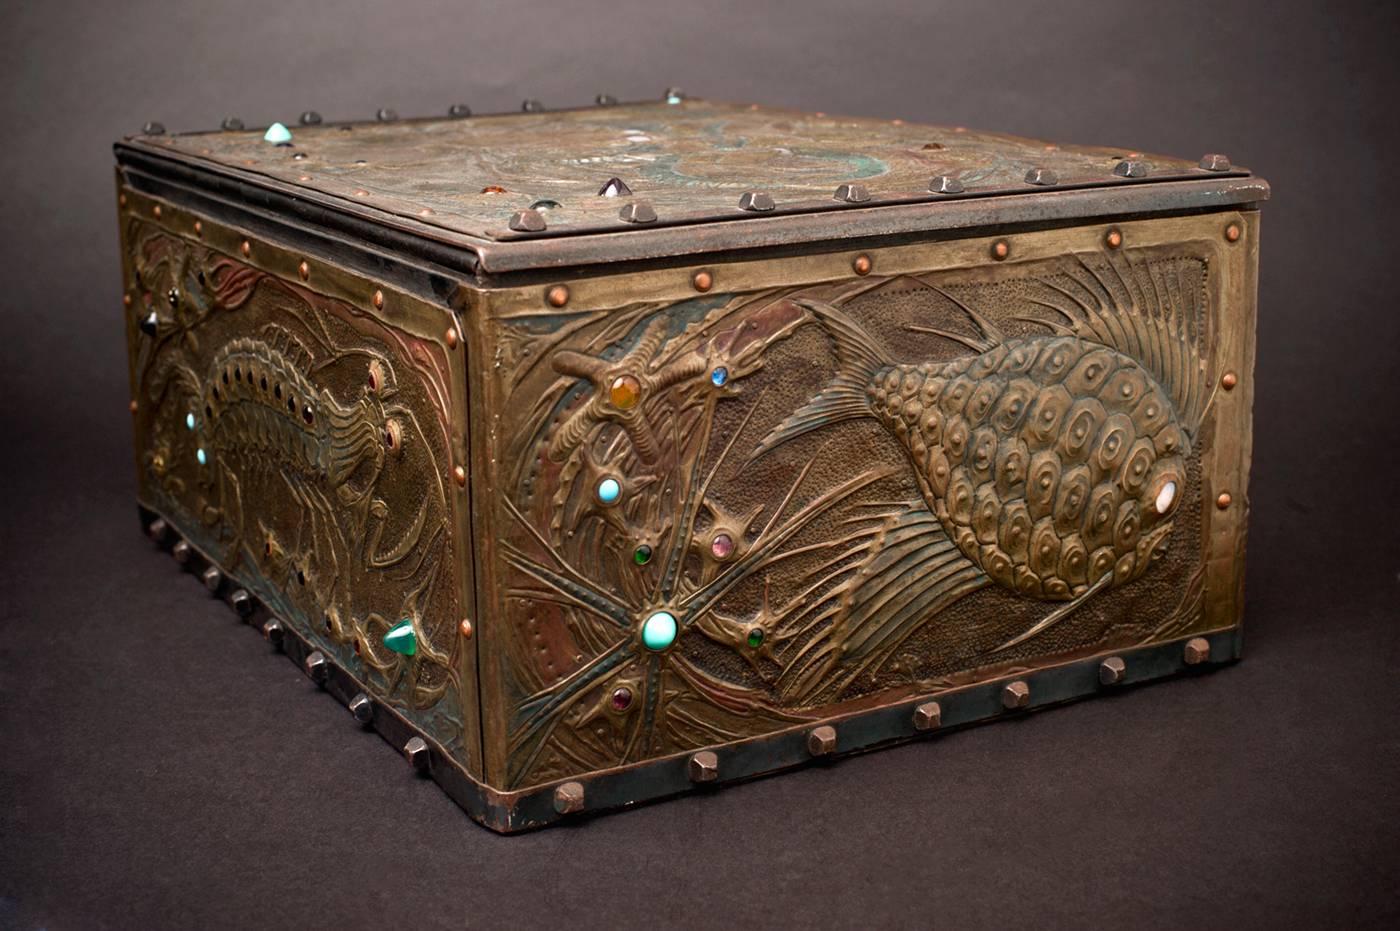 Daguet’s beautifully patinated cash box is a rich textural and colorful tour de force. So much more than an adaptation of Japanese wood block print sources to his metalwork craft, Daguet created a veritable 3-dimensional metal aquarium to charm the